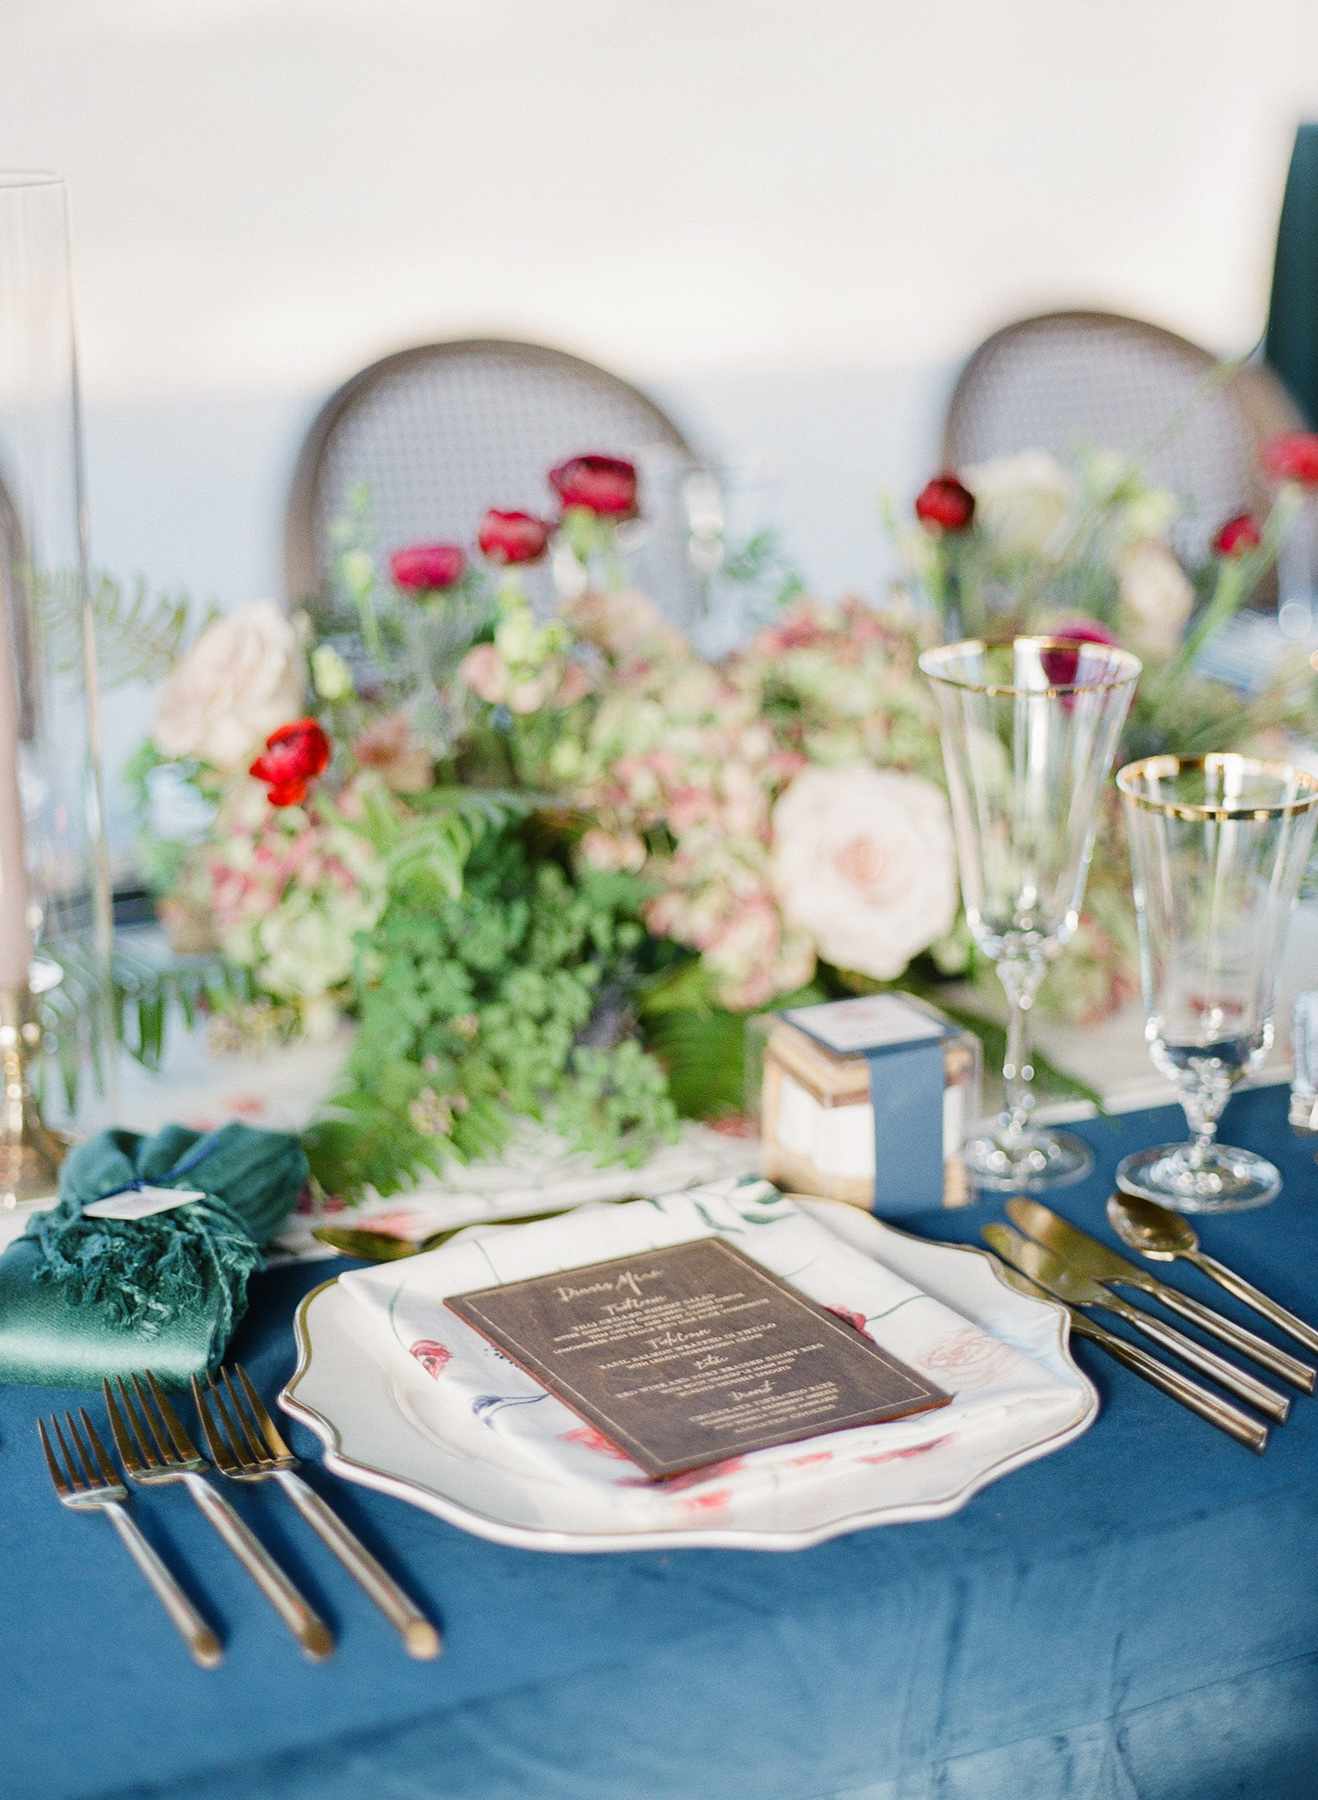 gold rimmed place settings and gold flatware on blue table linens